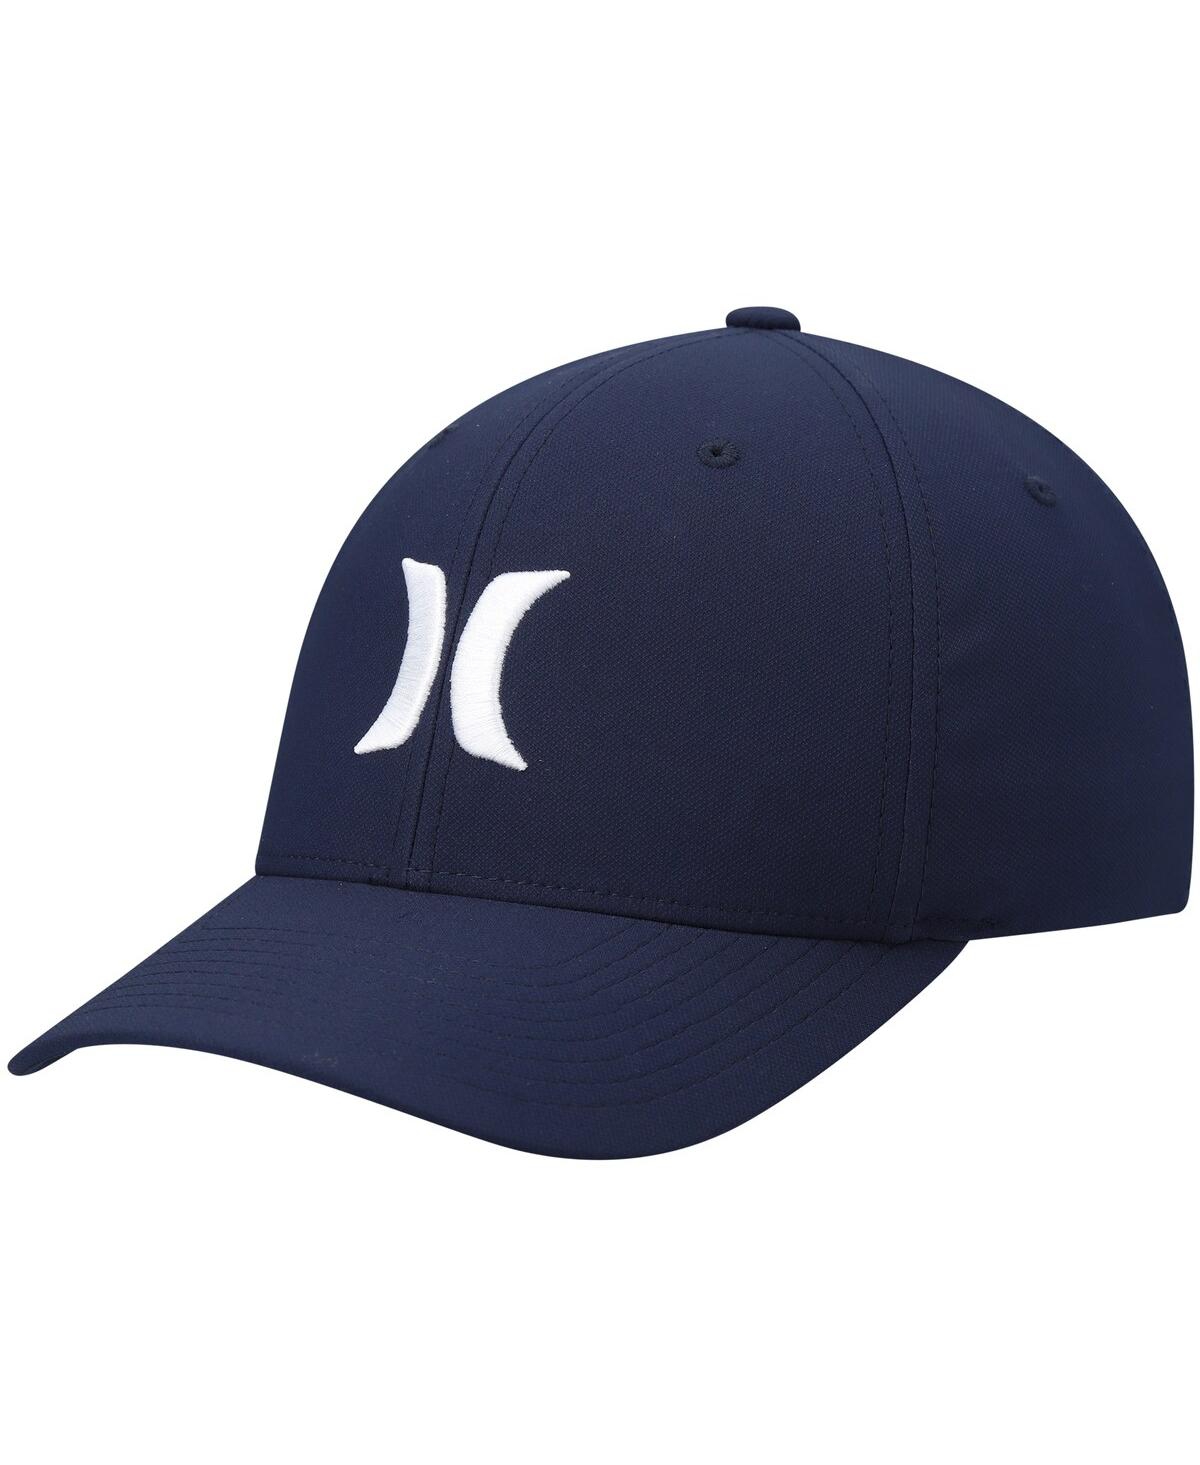 Men's Hurley Navy One and Only H2O-Dri Flex Hat - Navy